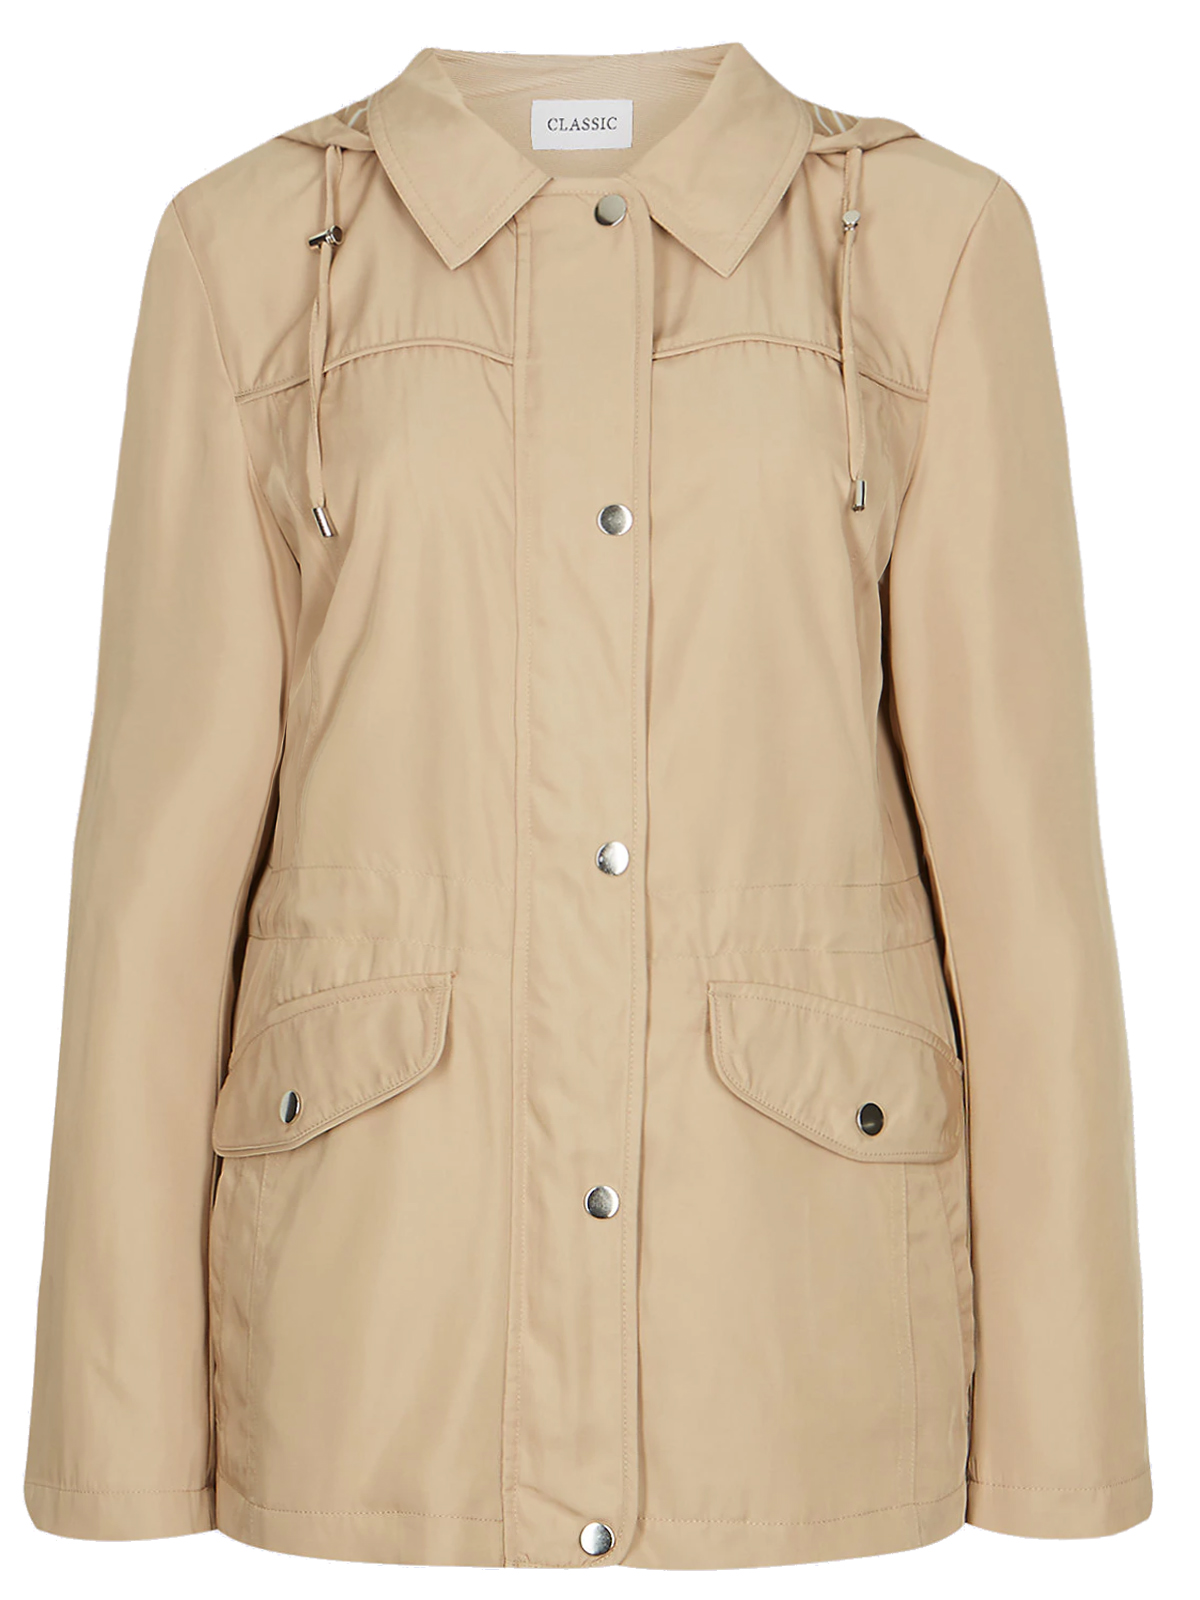 Marks and Spencer - - M&5 NEUTRAL Harrington Anorak Jacket with ...